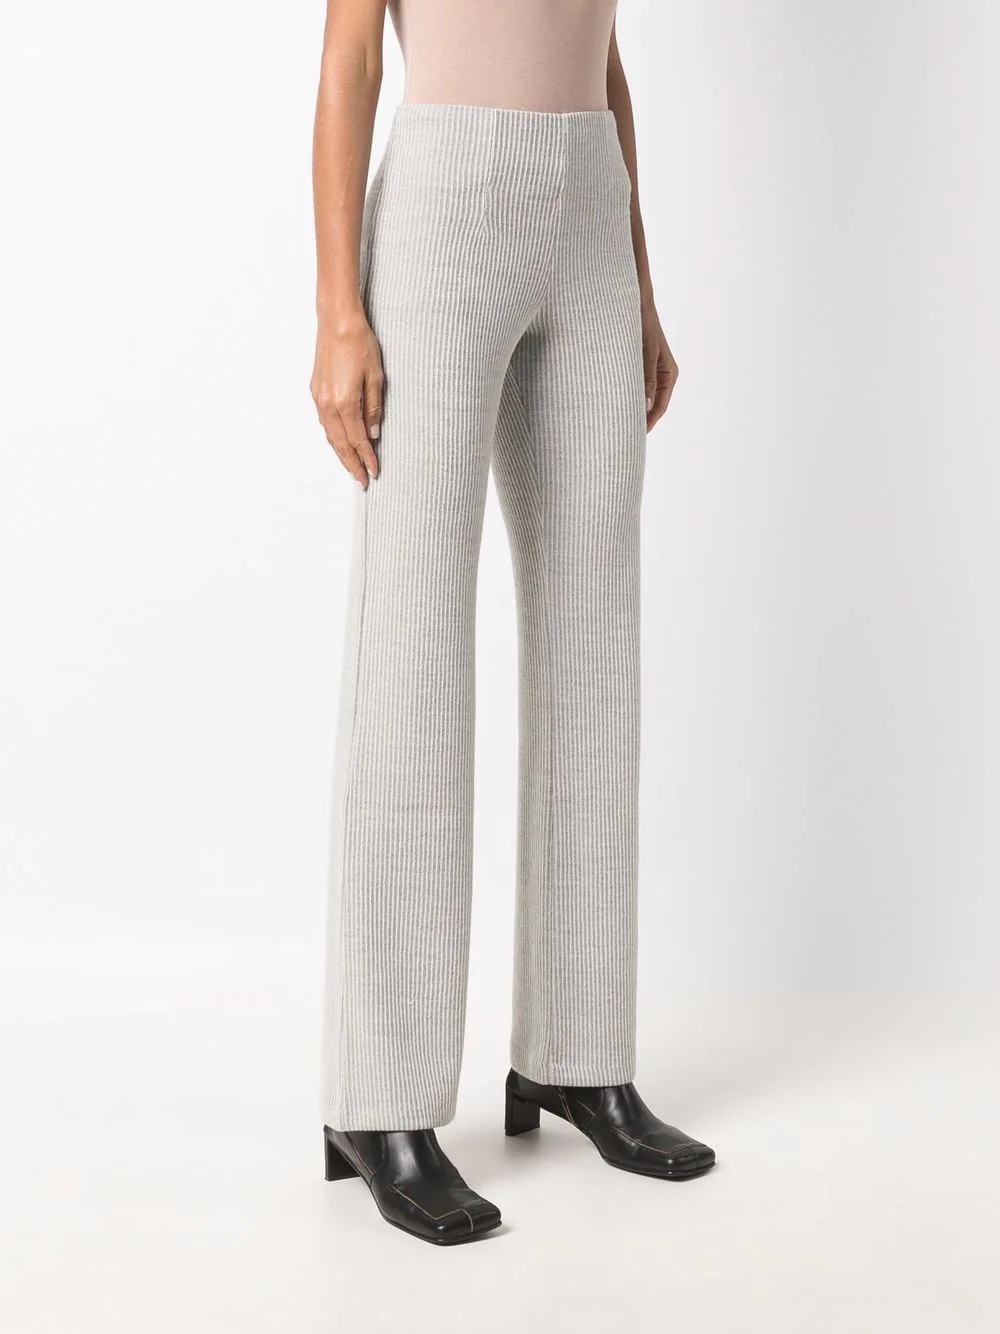 Draft ribbed flared trousers - 3